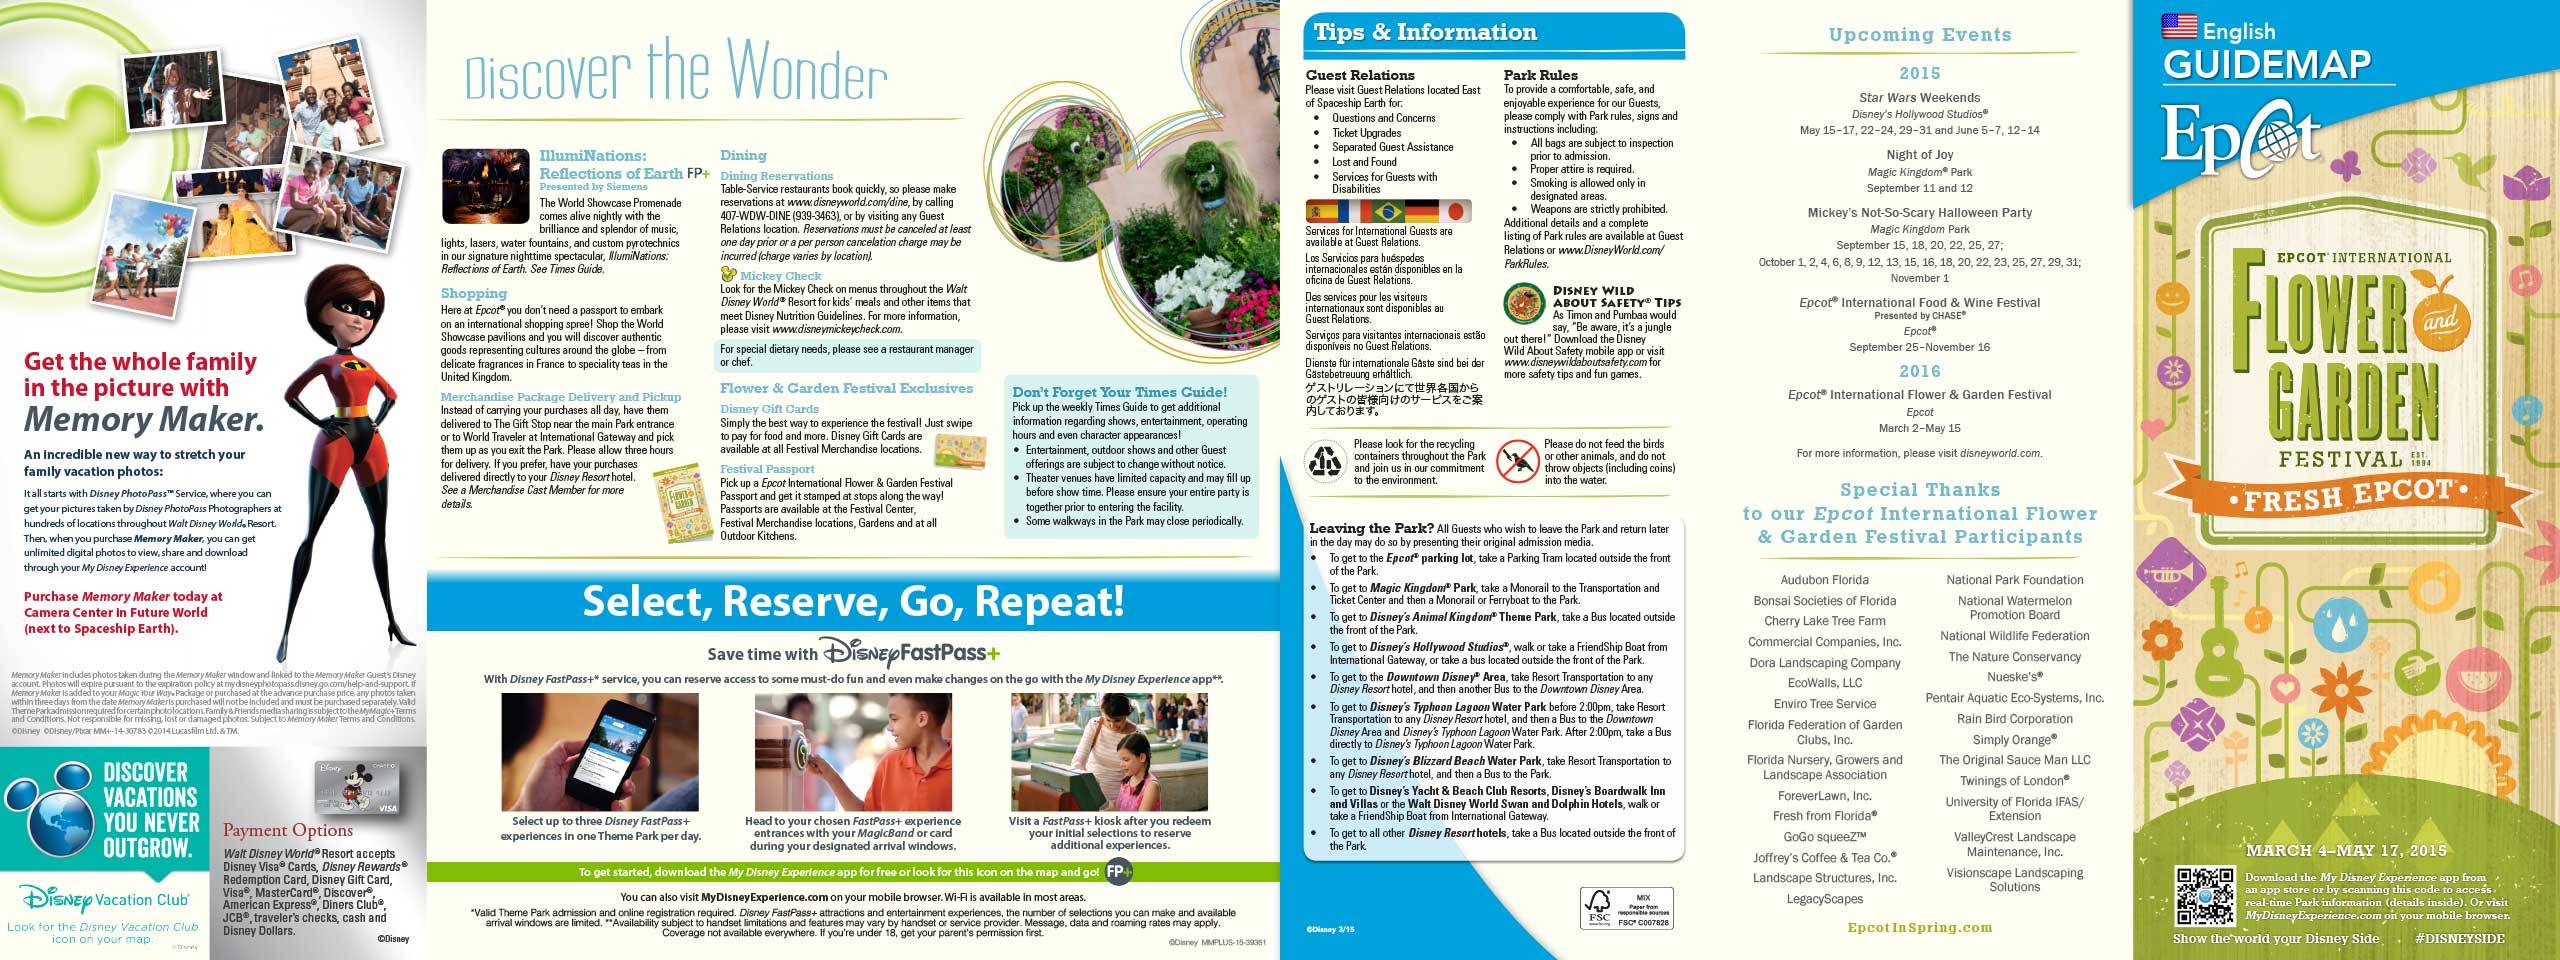 2015 Epcot Flower and Garden Festival guide map - Front